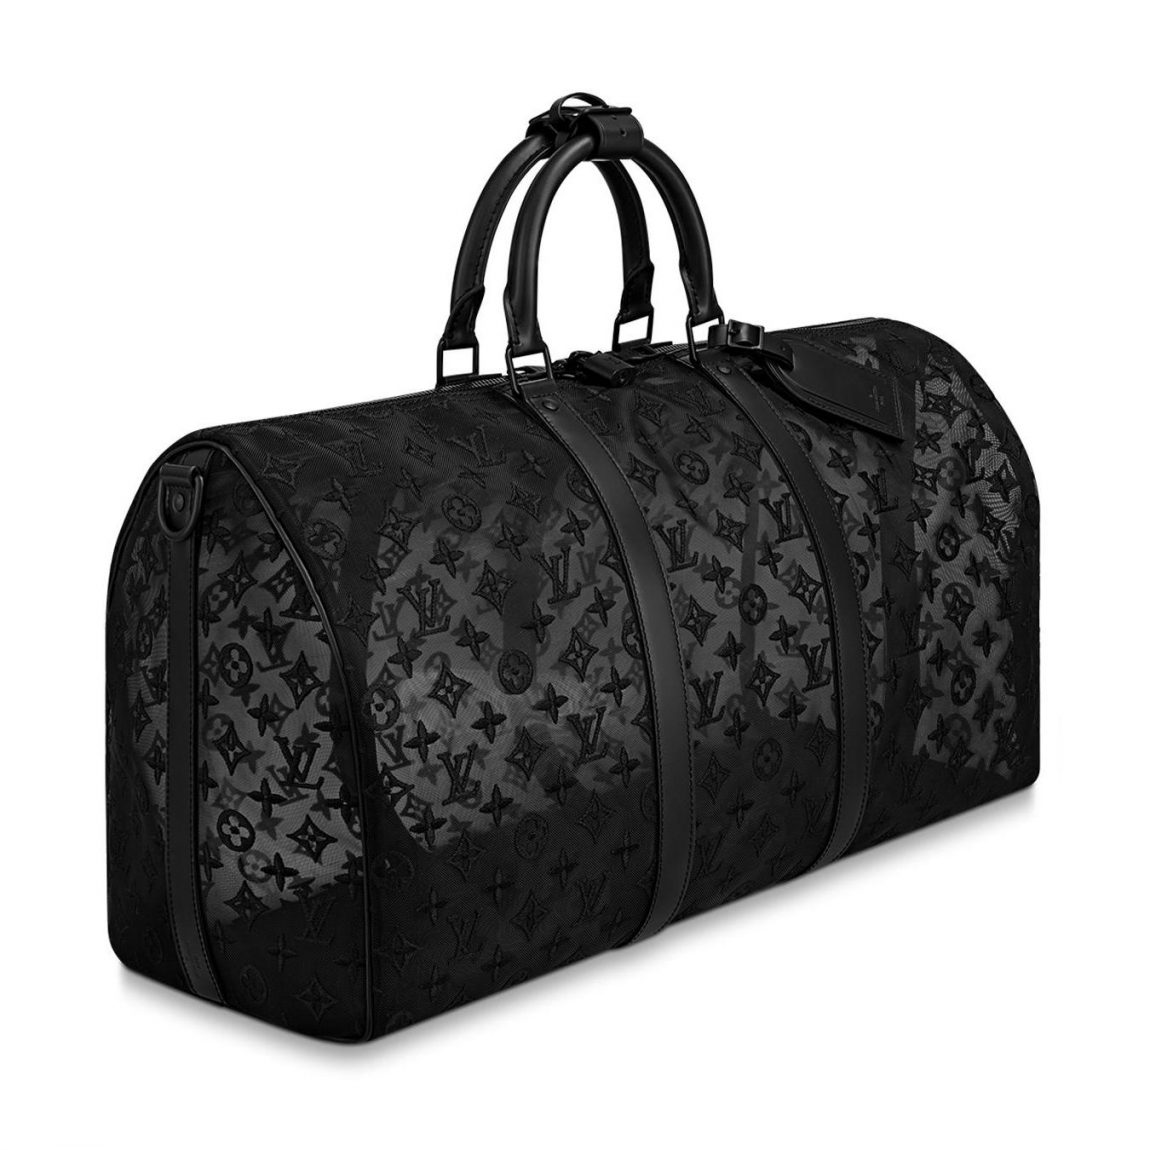 Vuitton See Through Keepall 50 Reference Guide - Spotted Fashion